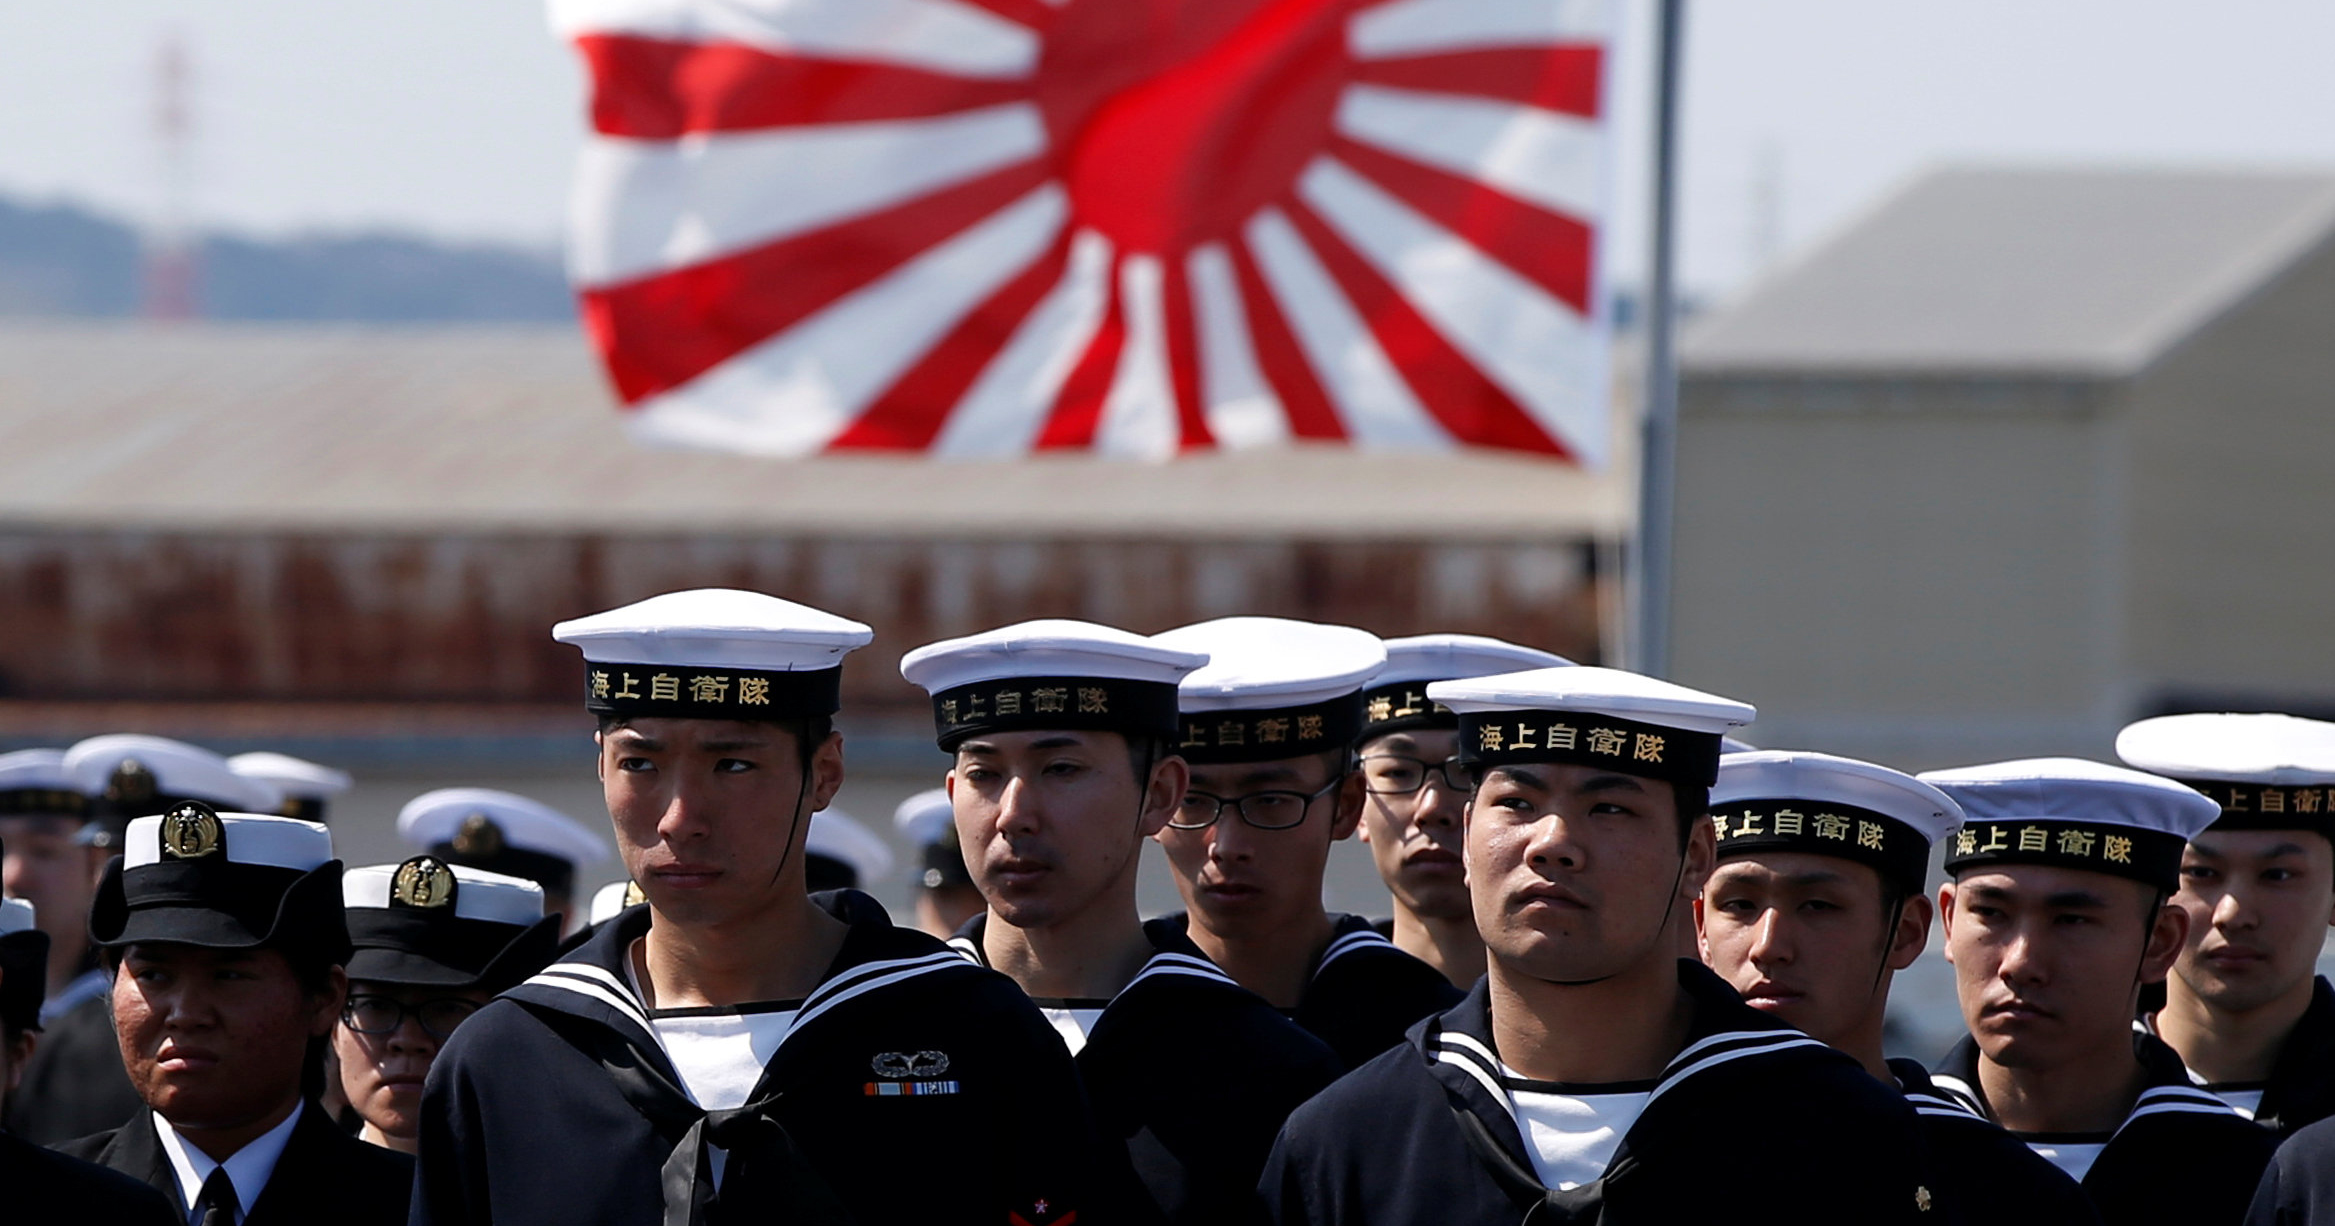 Crew members of the Japan Maritime Self-Defense Force are seen in front of Japan's naval flag during a handover ceremony by Japan Marine United Corporation in Yokohama, Japan, March 22, 2017.